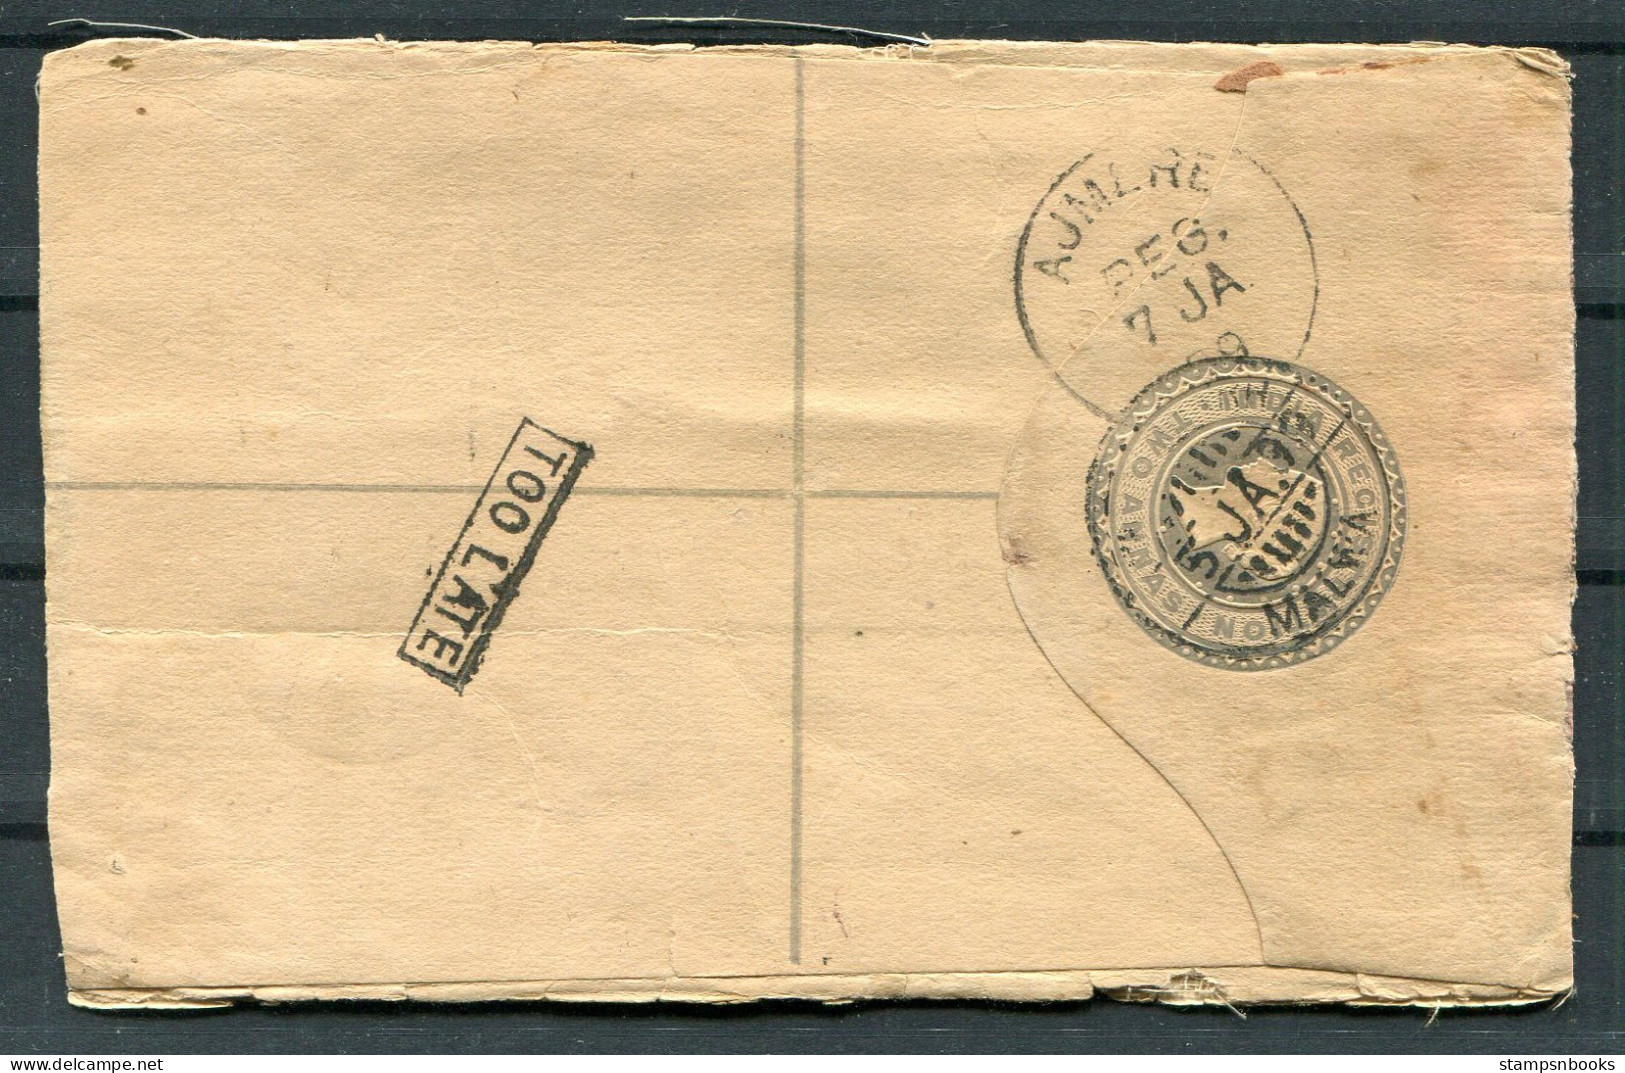 1899 India Registered Letter Stationery Malwa - Ajmere, Boxed "TOO LATE" - 1882-1901 Imperium